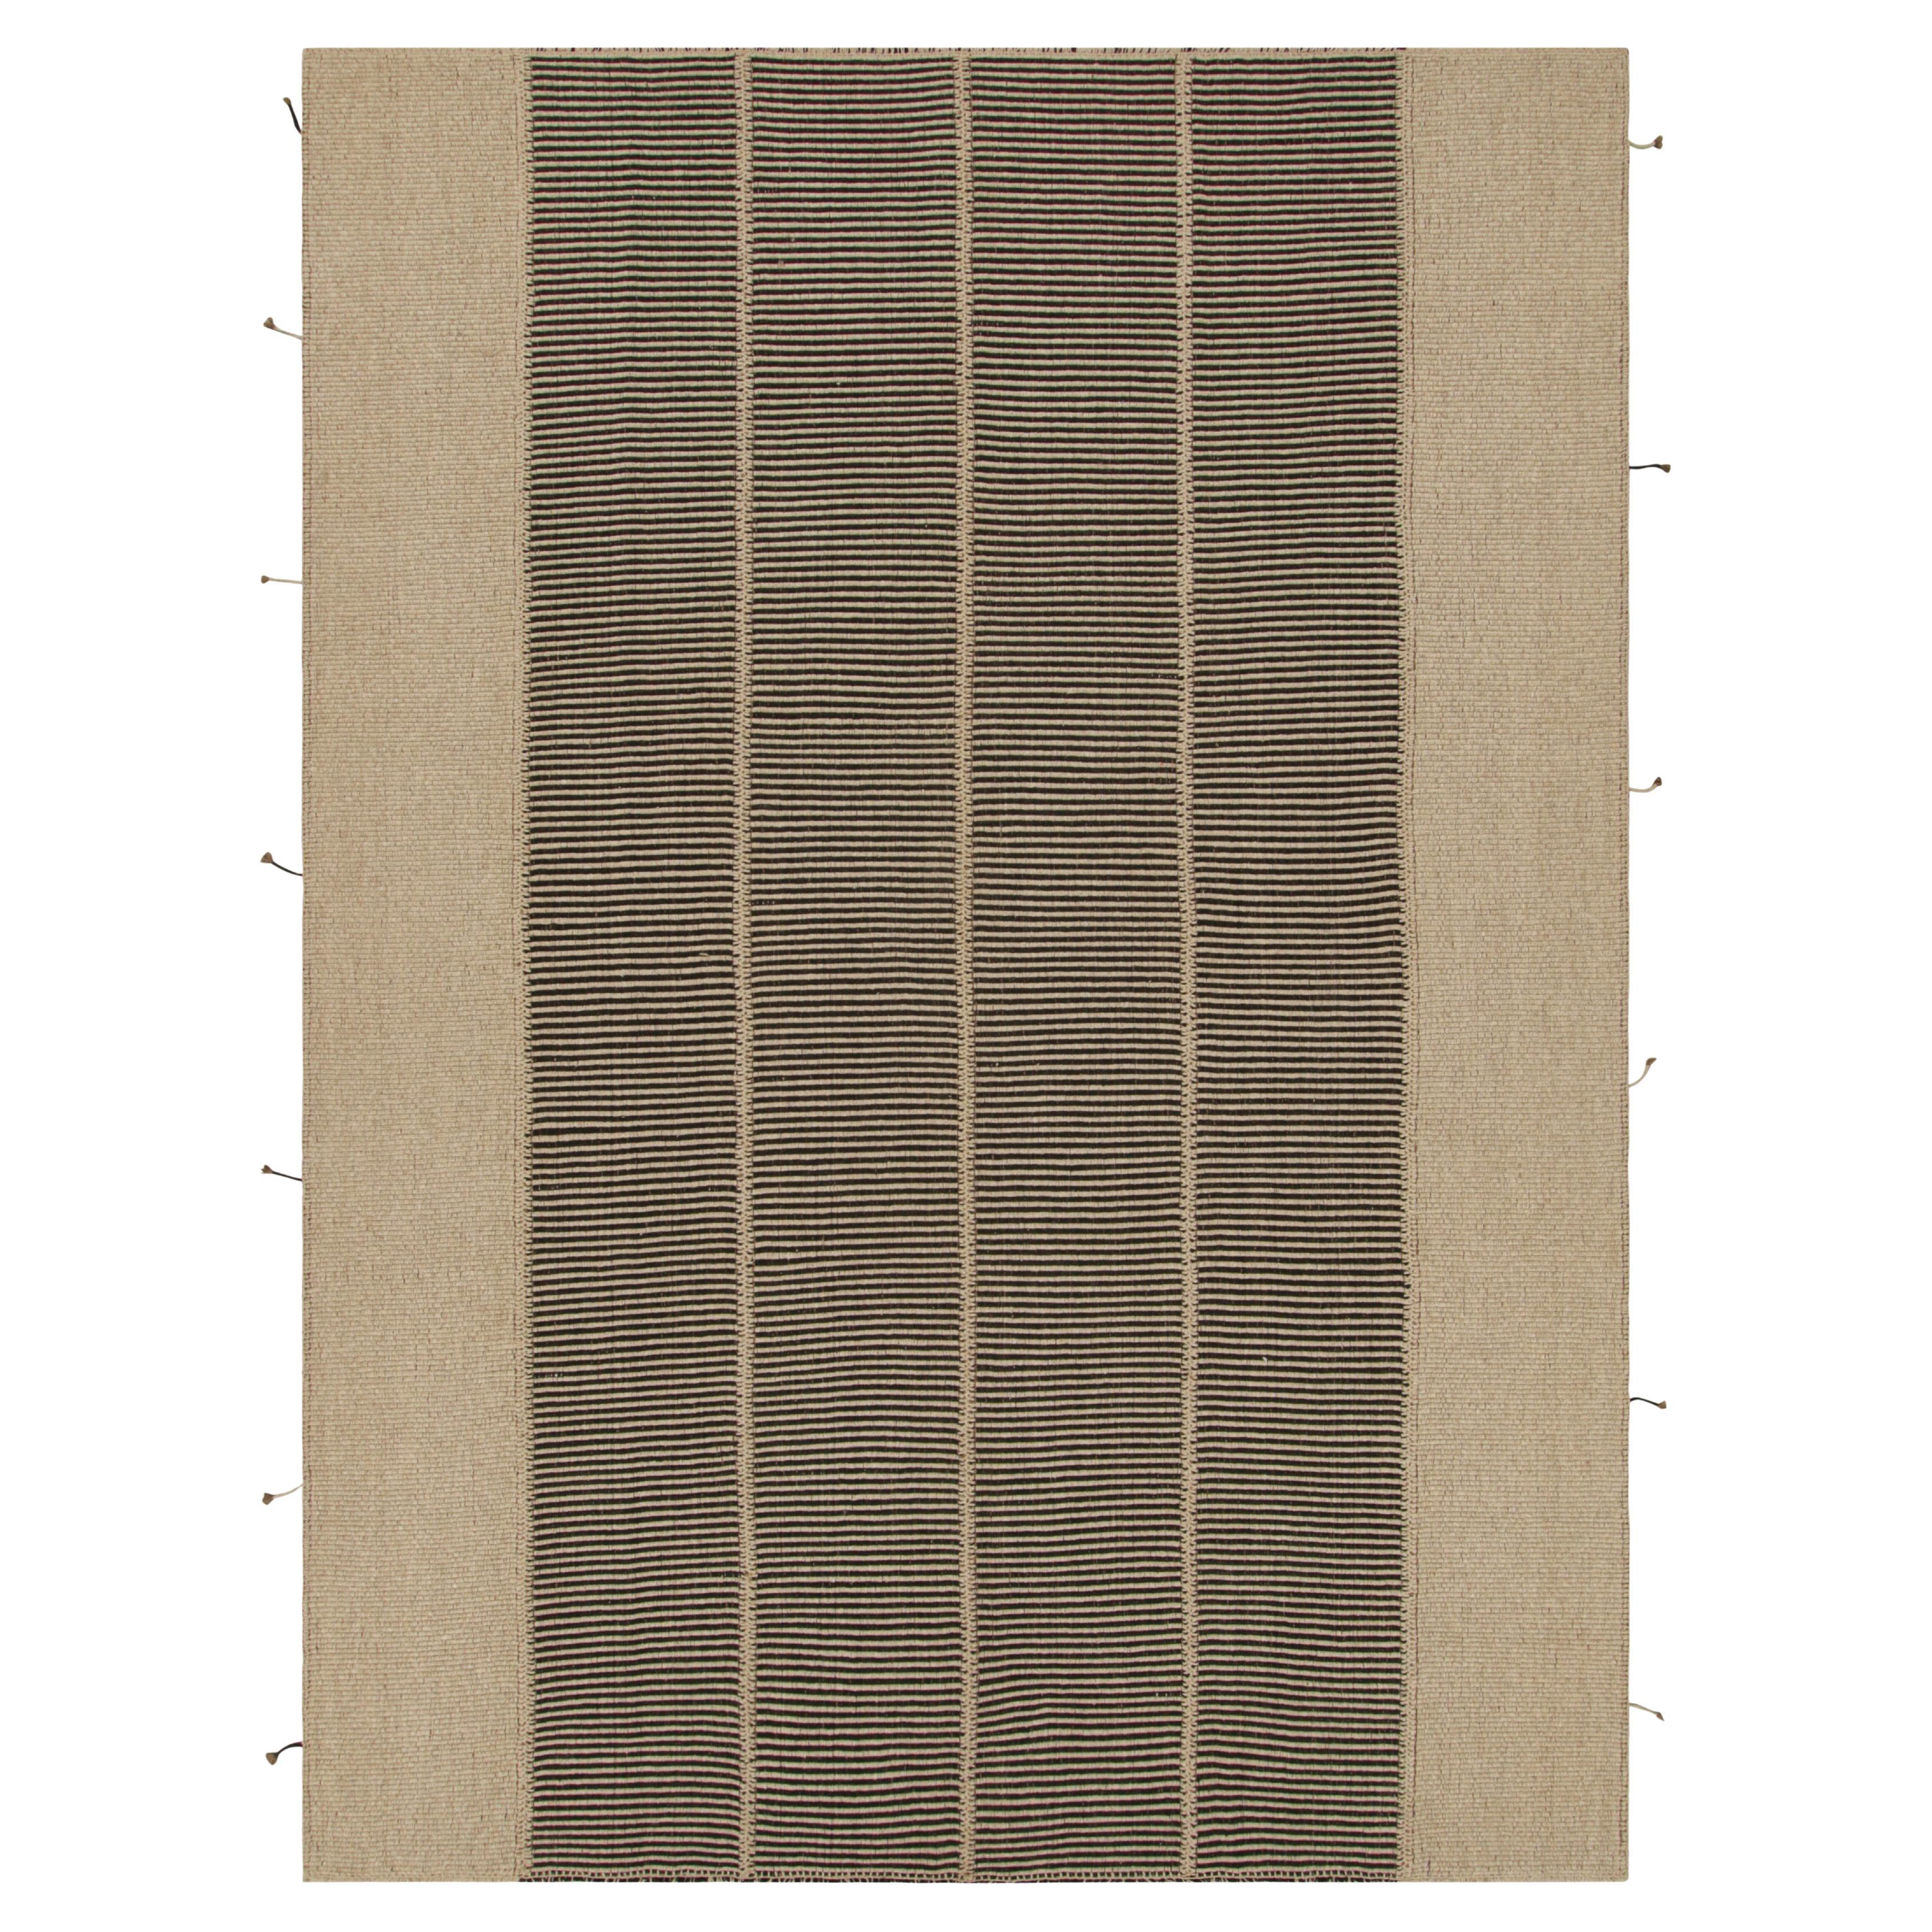 Rug & Kilim’s Contemporary Kilim in Black and Beige Textural Stripes 